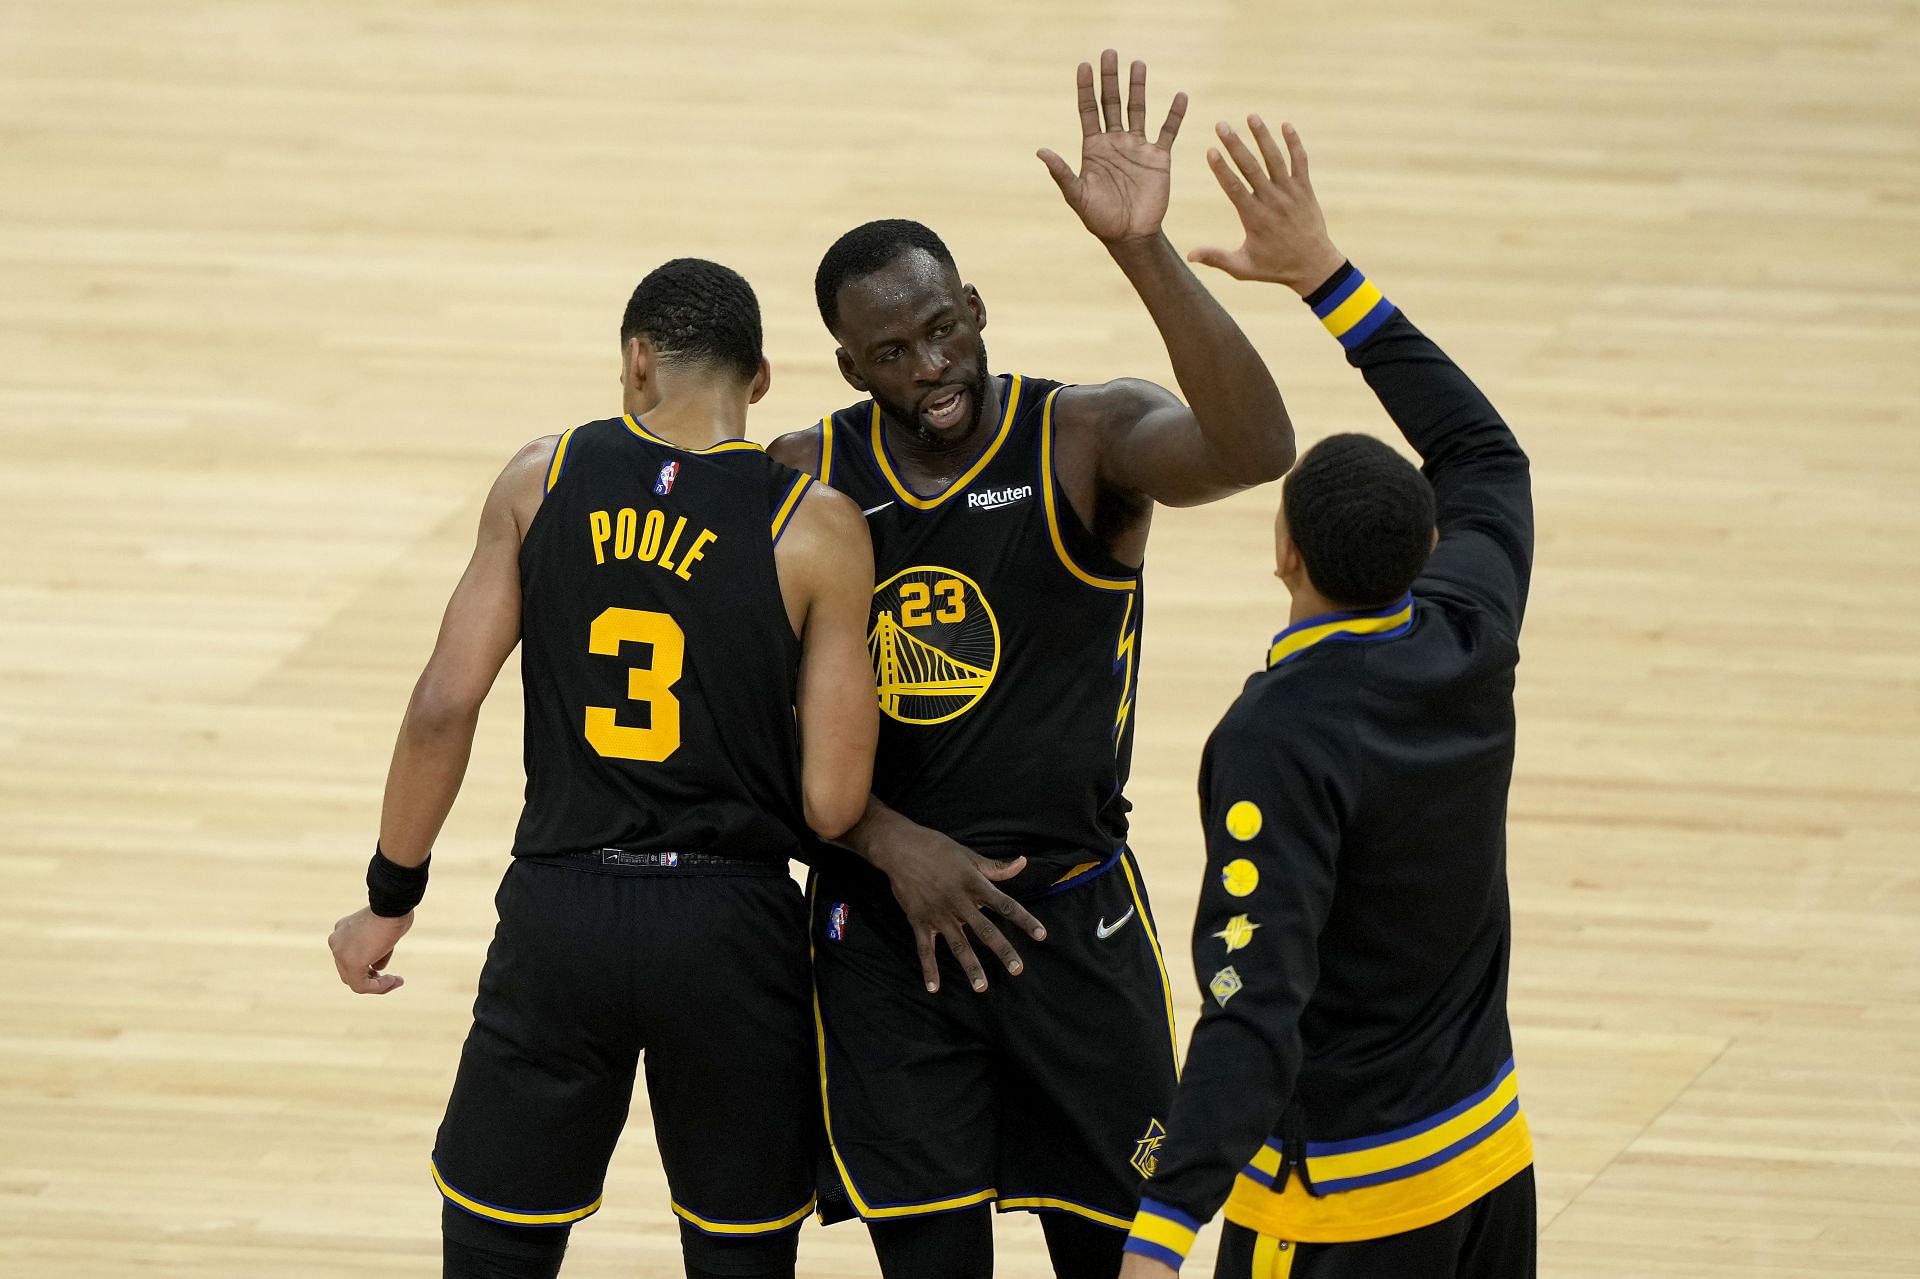 Draymond Green #23 of the Golden State Warriors celebrates with his teammates